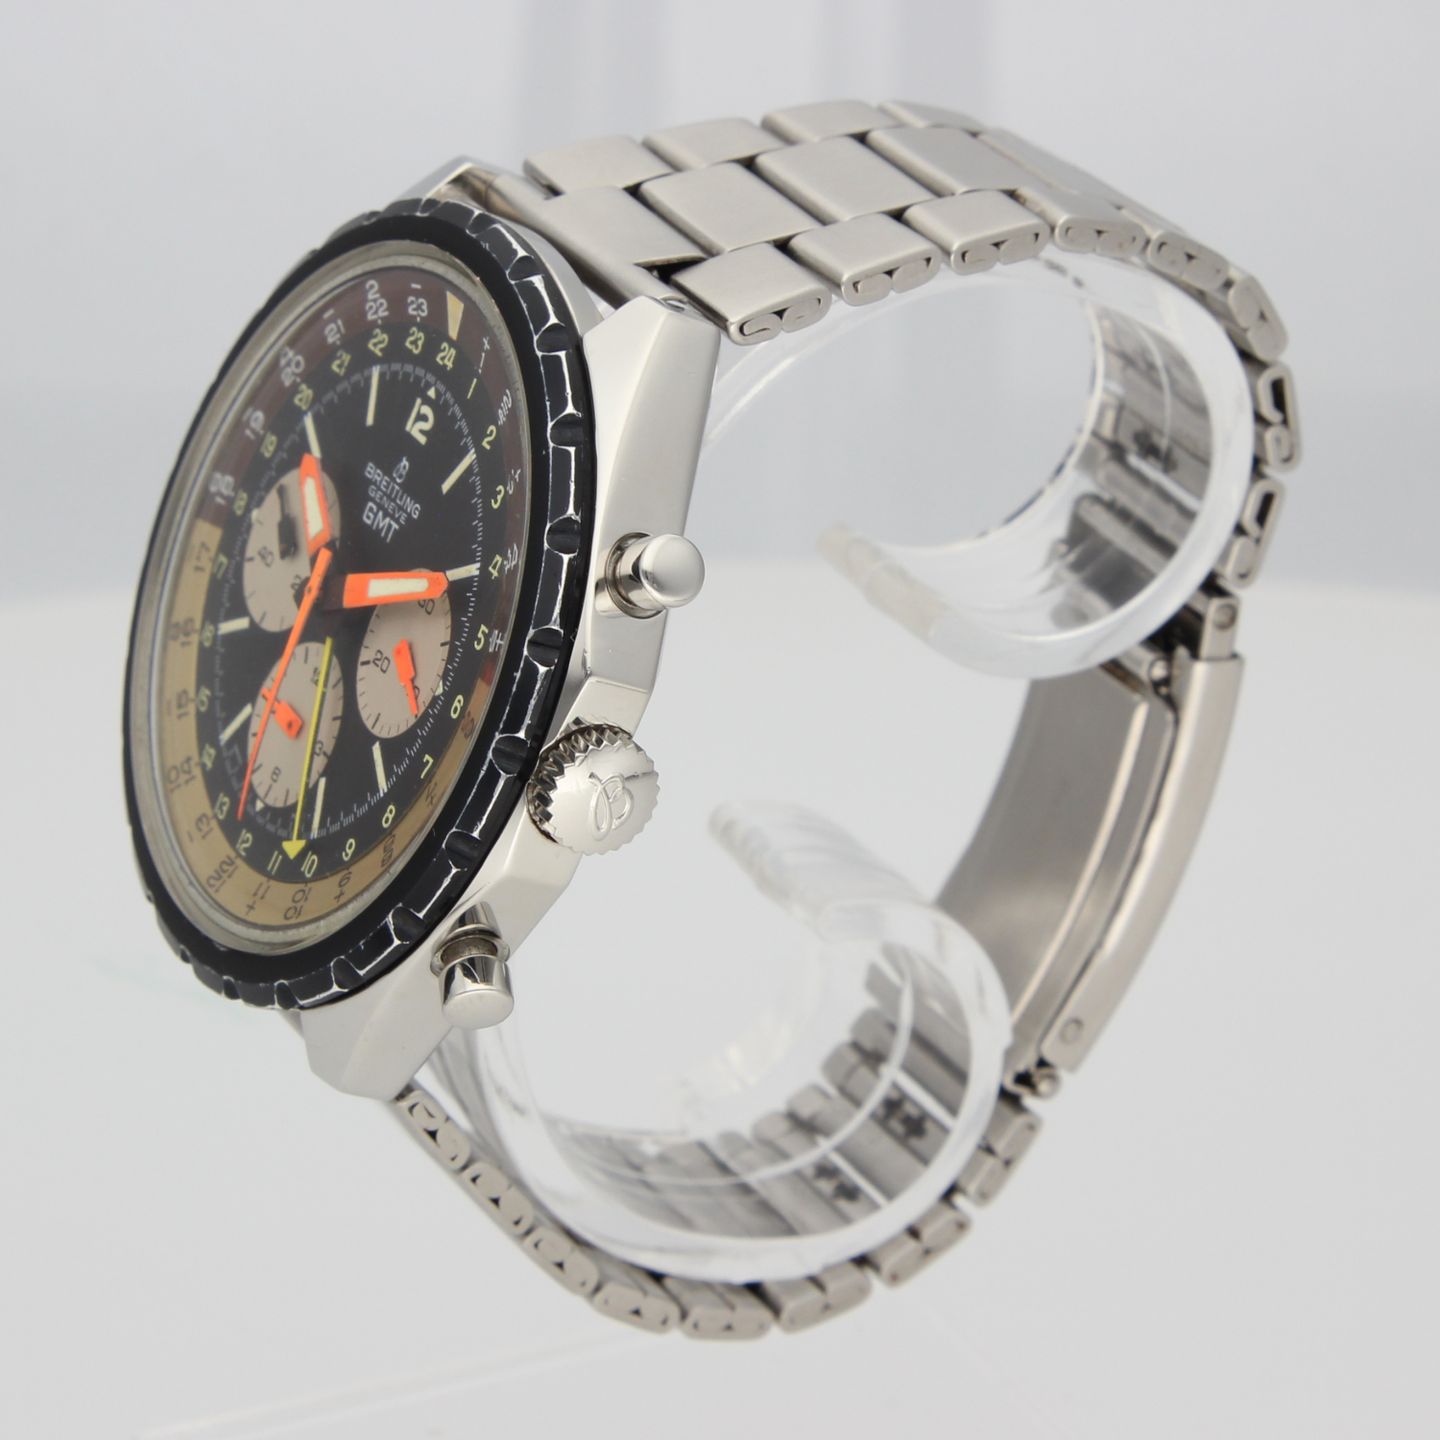 Breitling Chrono-Matic 11525/67 (1968) - Multi-colour dial 48 mm Steel case (8/8)